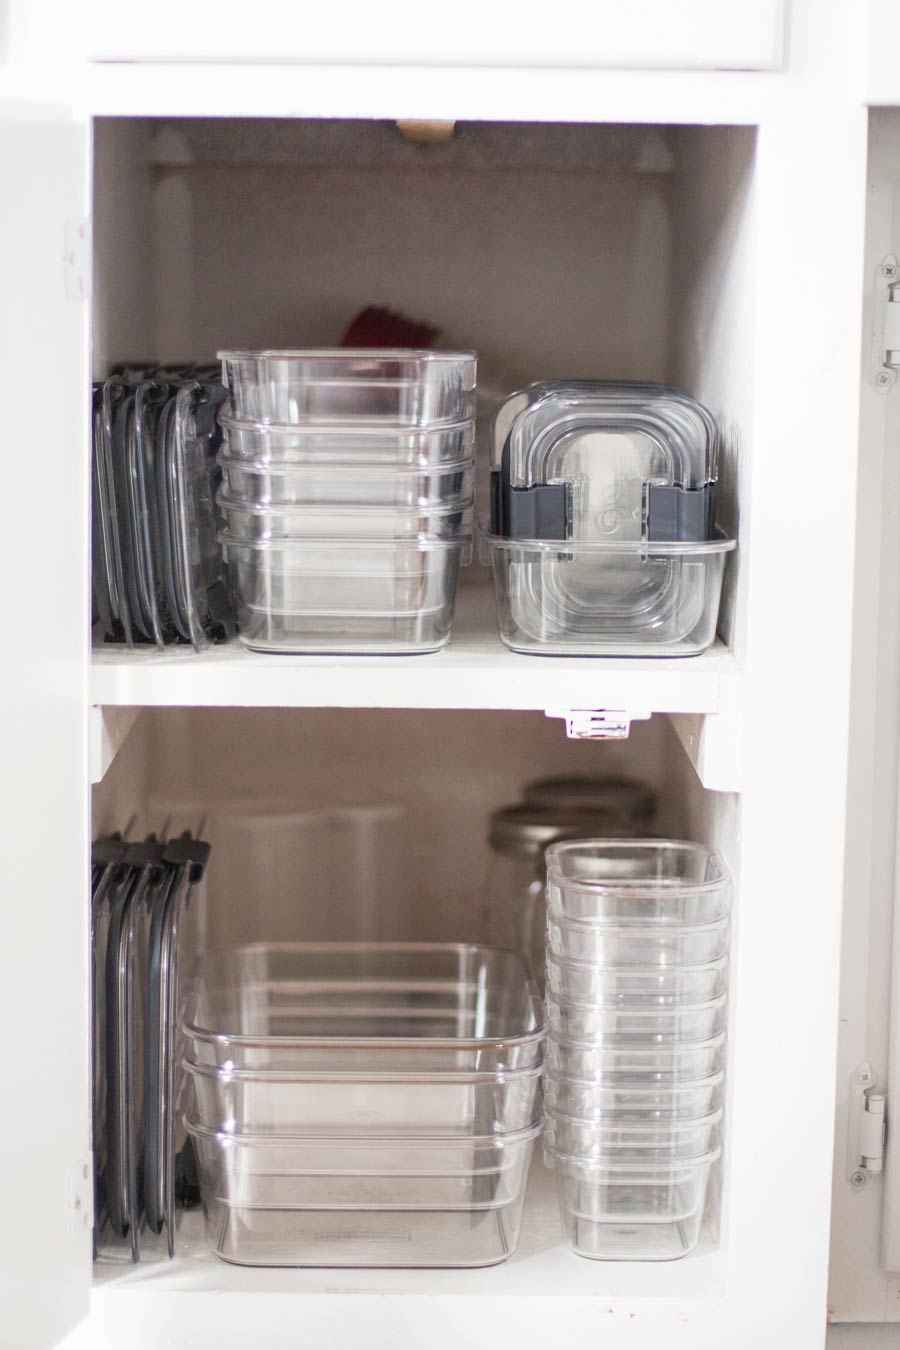 There's Now a Built-In Tupperware Organizer You Can Get For Your